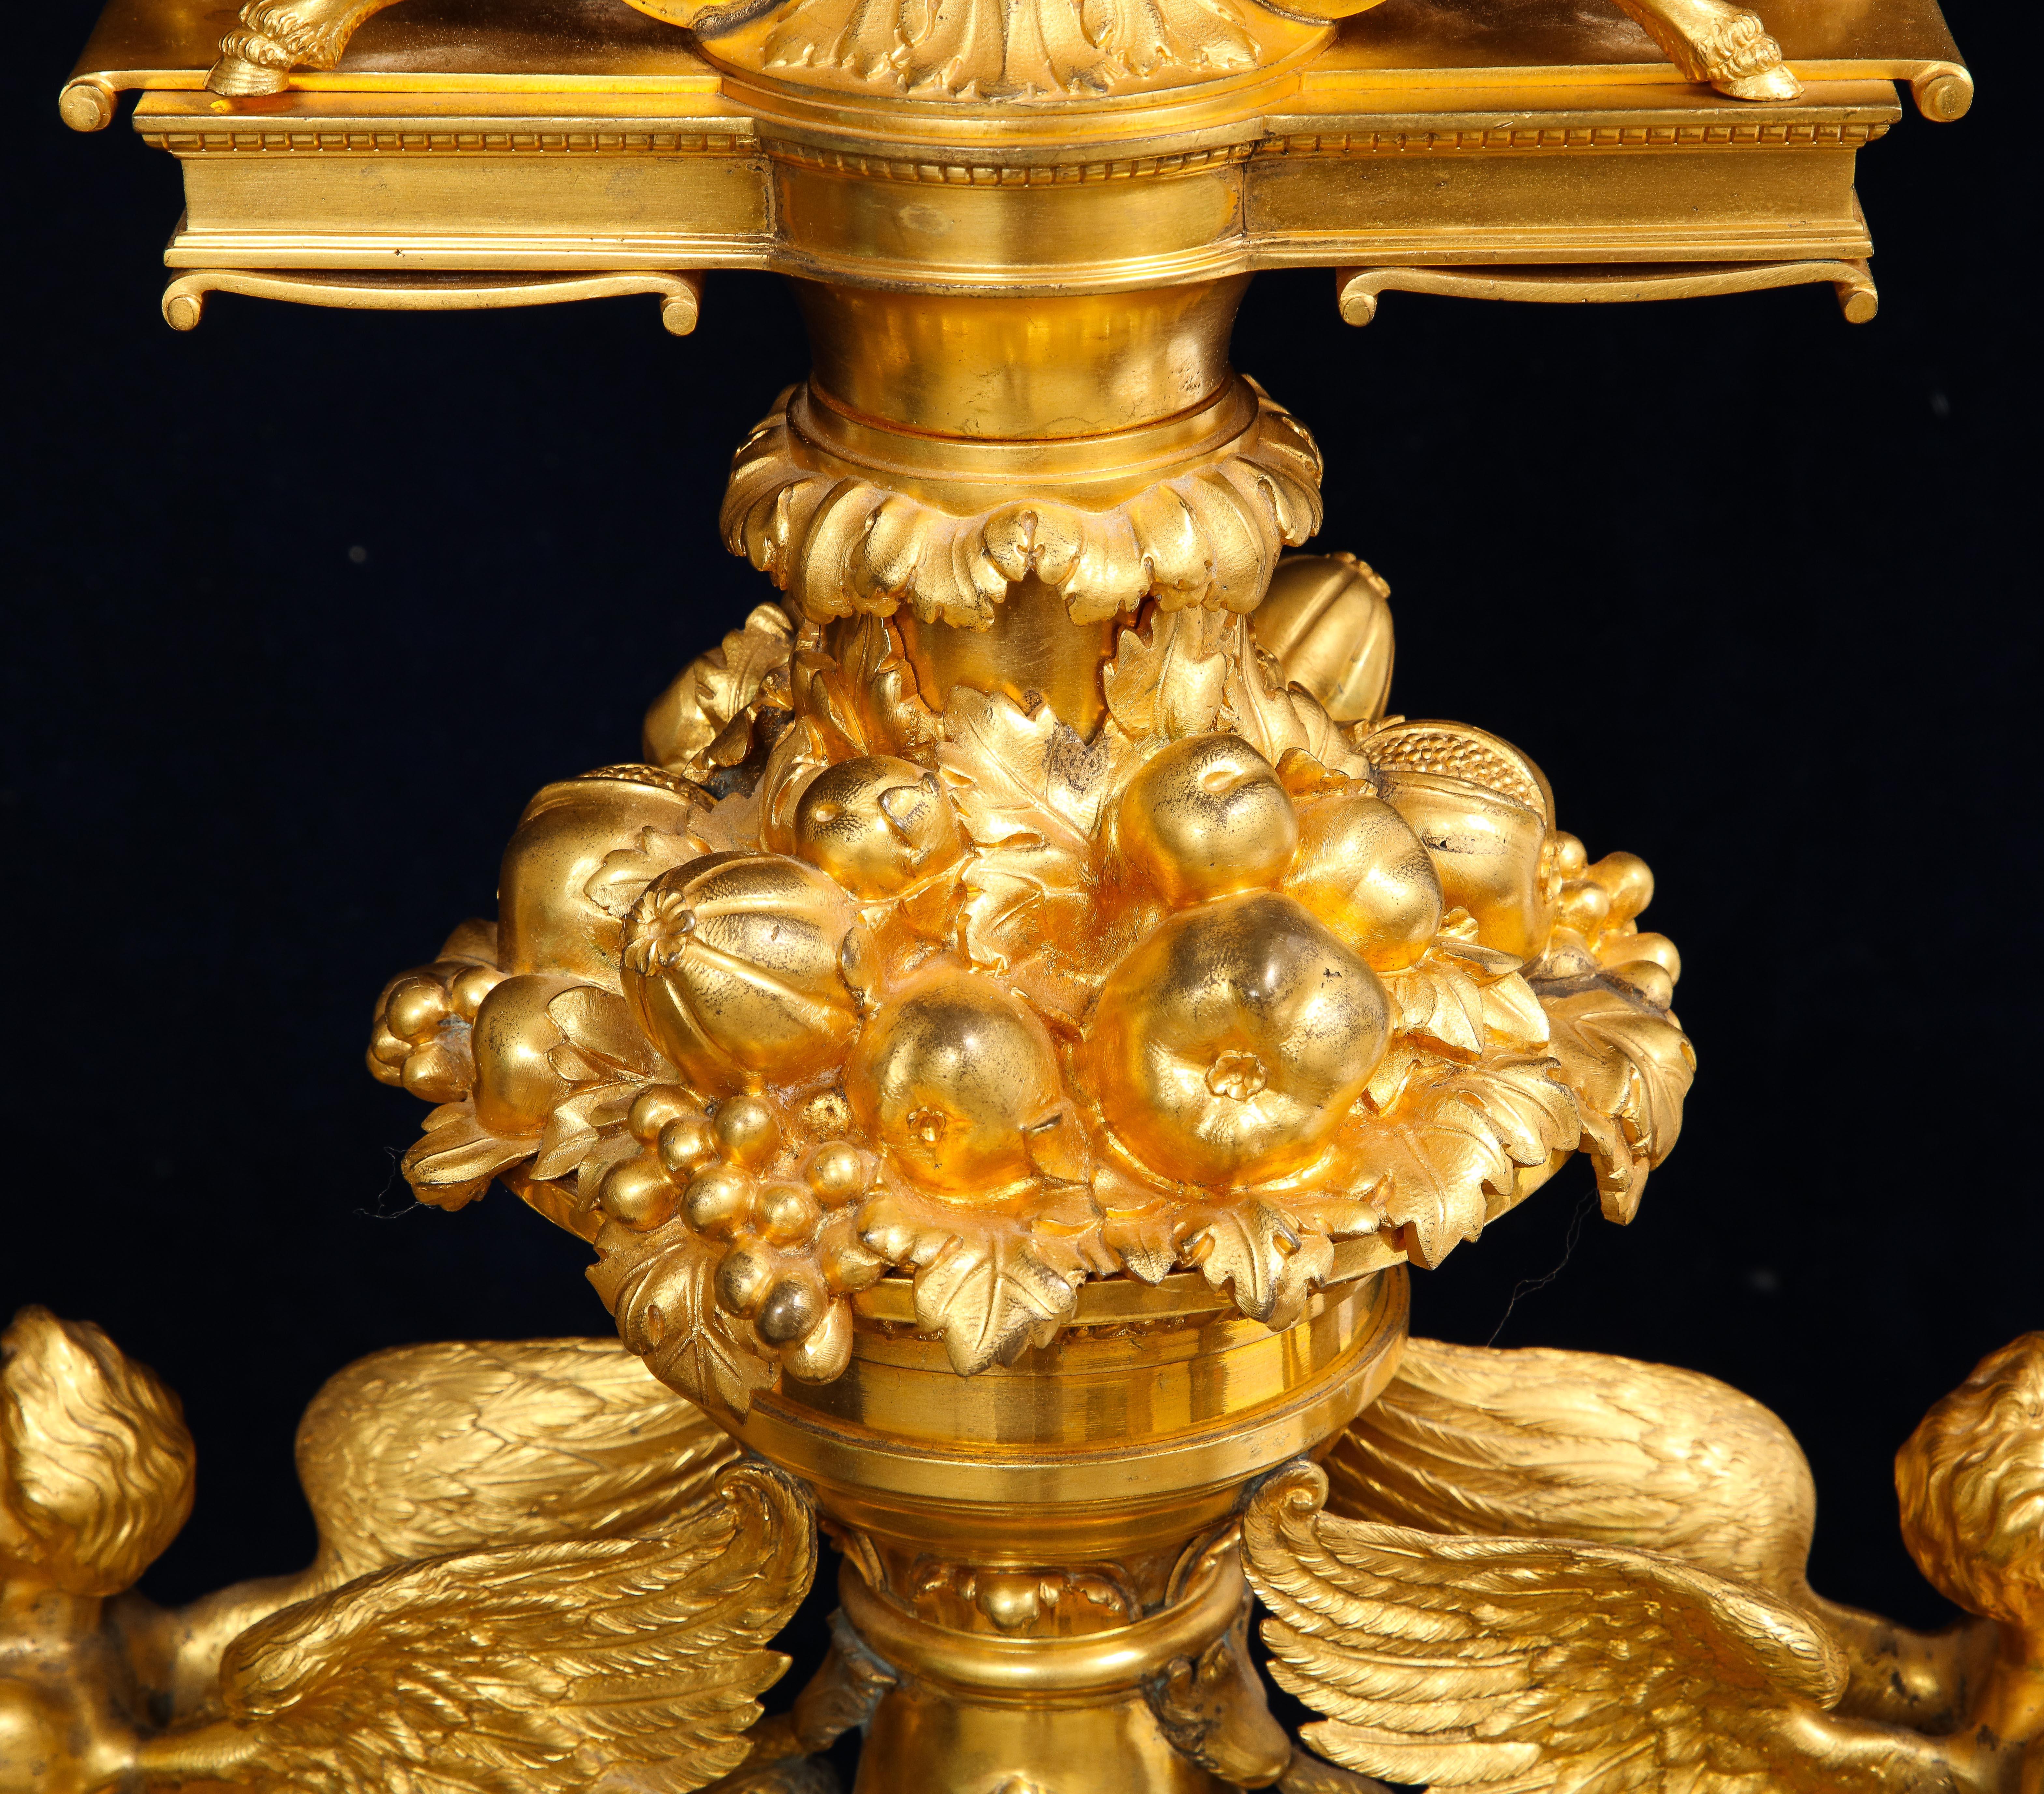 Marvelous Pair of 19th C. French Ormolu Four Arm Candelabras, Signed P. Canaux For Sale 8